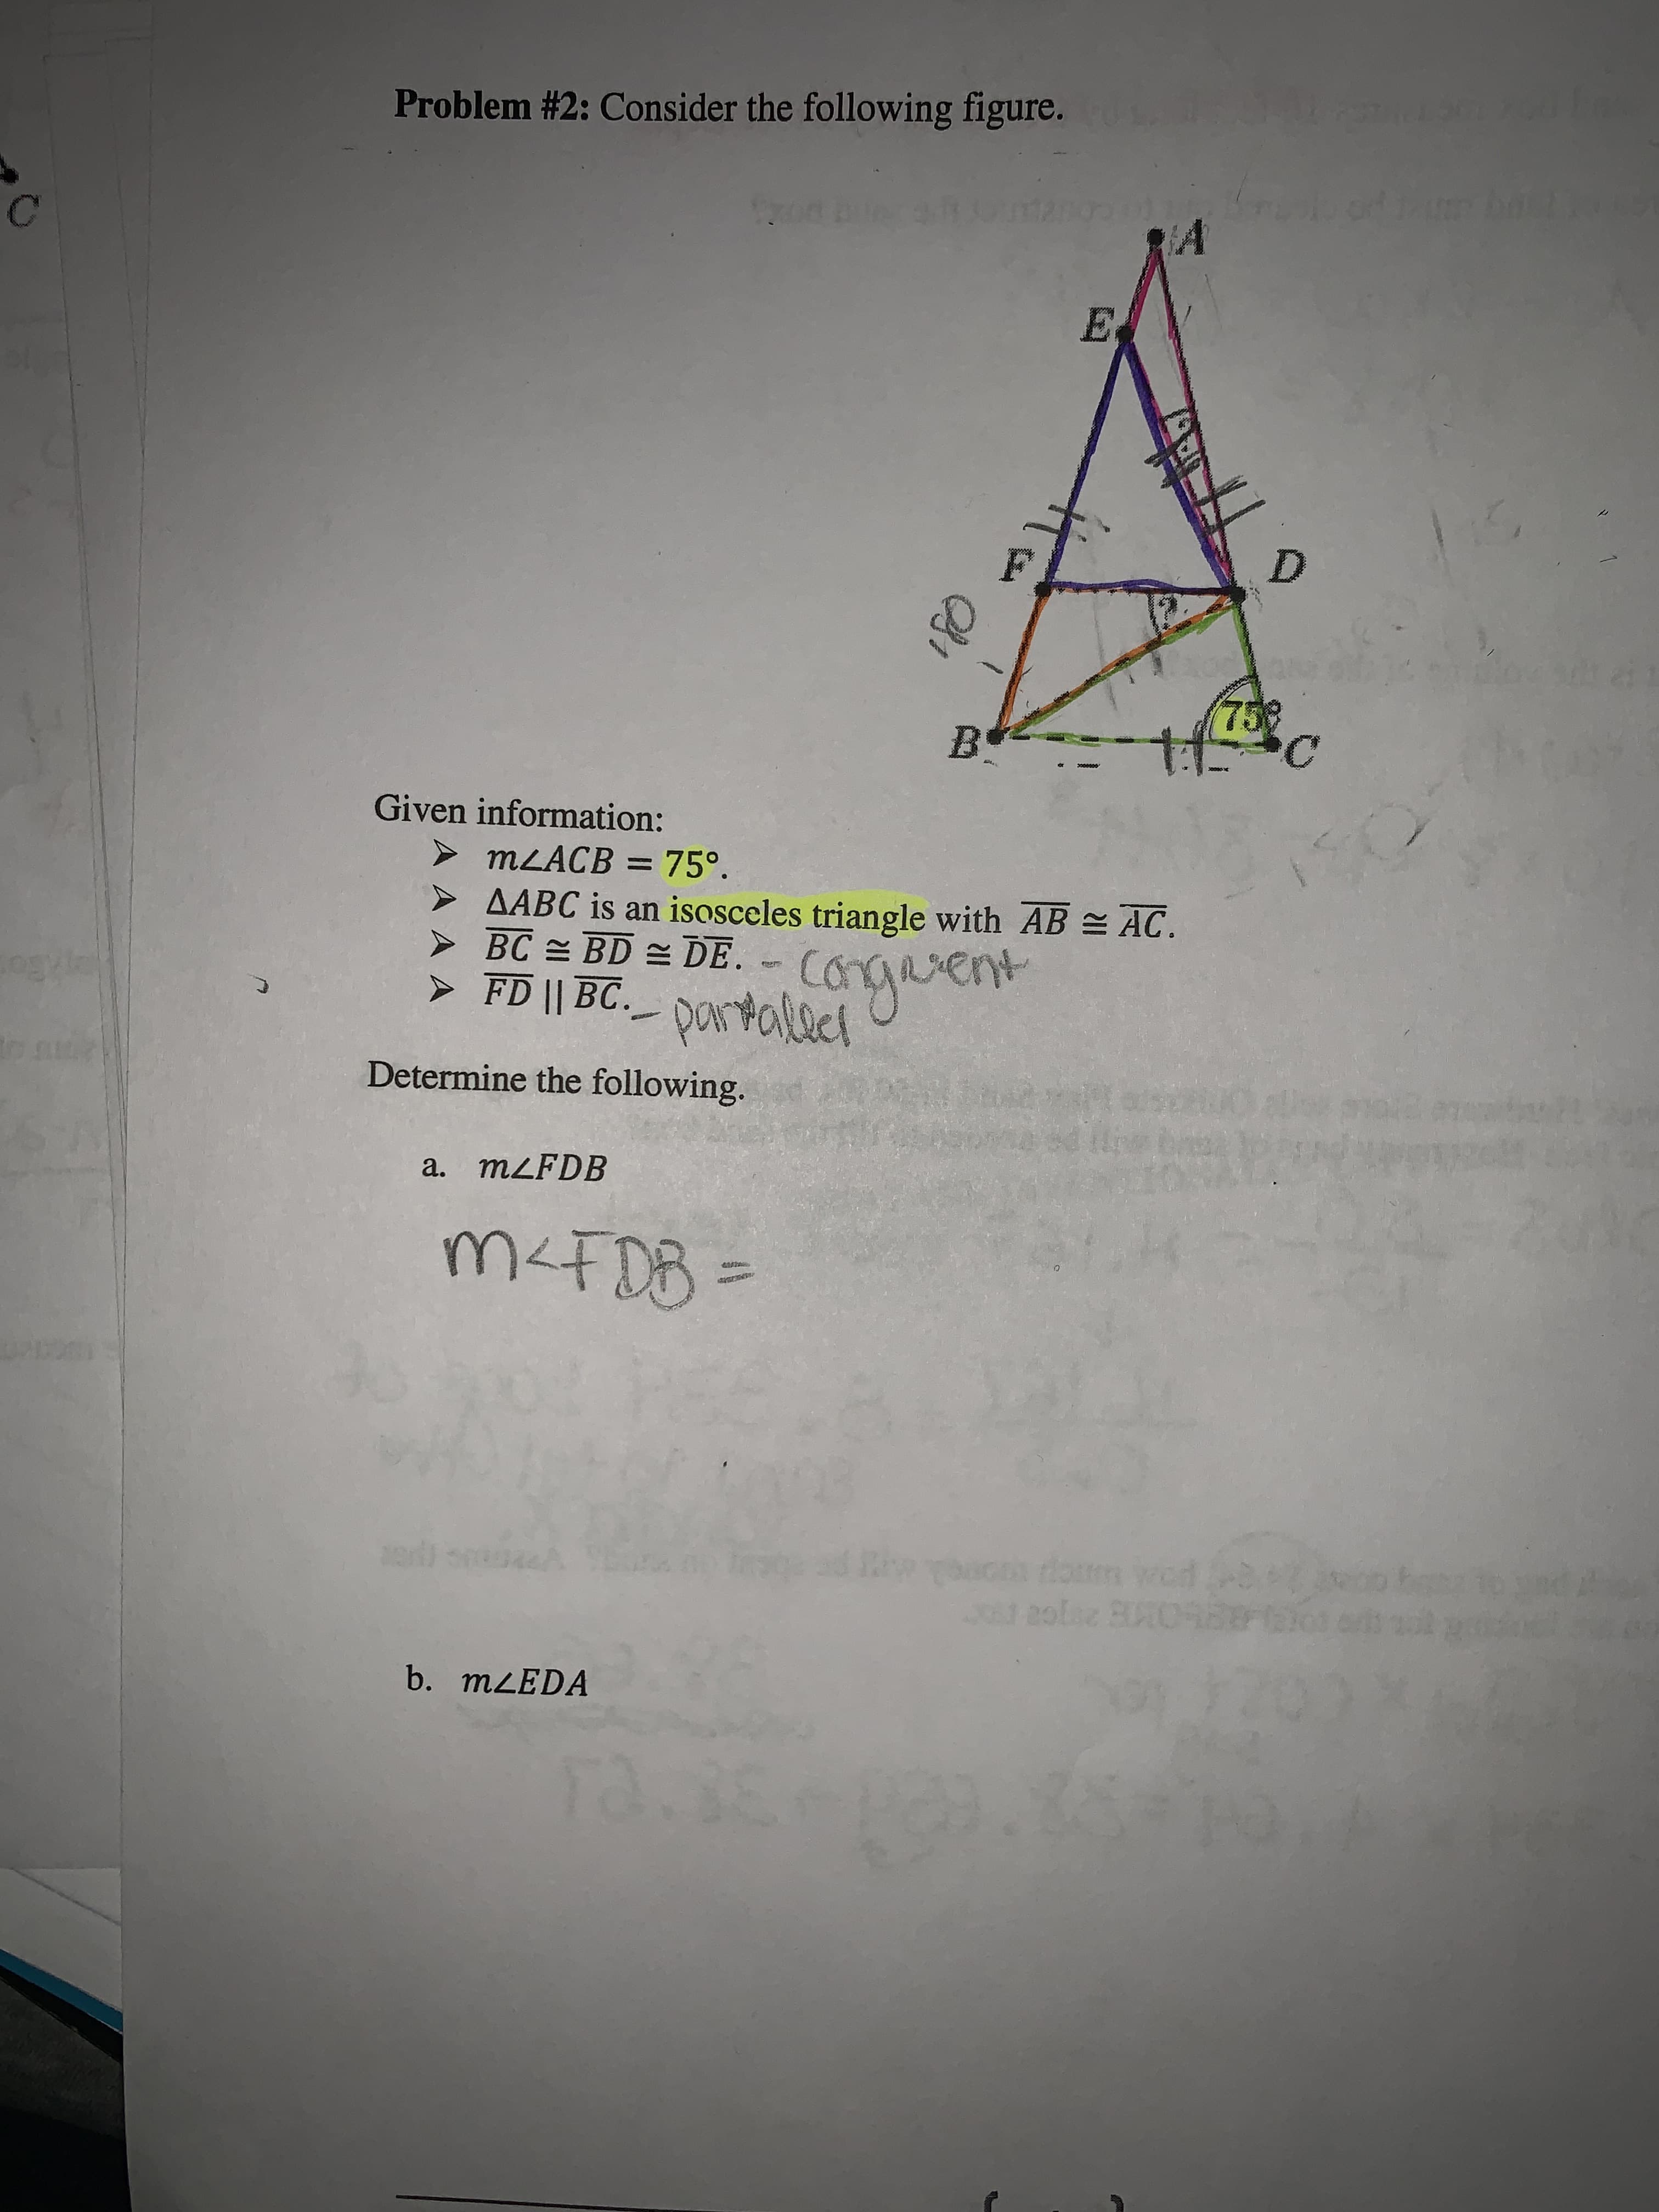 Problem #2: Consider the following figure.
ro uf
A
foxd
D
759
C
B
Given information:
MLACB 75°
AABC is an isosceles triangle with AB
BC BD DE
AC.
Co
partalect
Determine the following.
FD I BC.ONtolci ent
গ
a. MLFDB
10)
oucdo cd
E 20liz BUTCH
b. MLEDA
TA.
